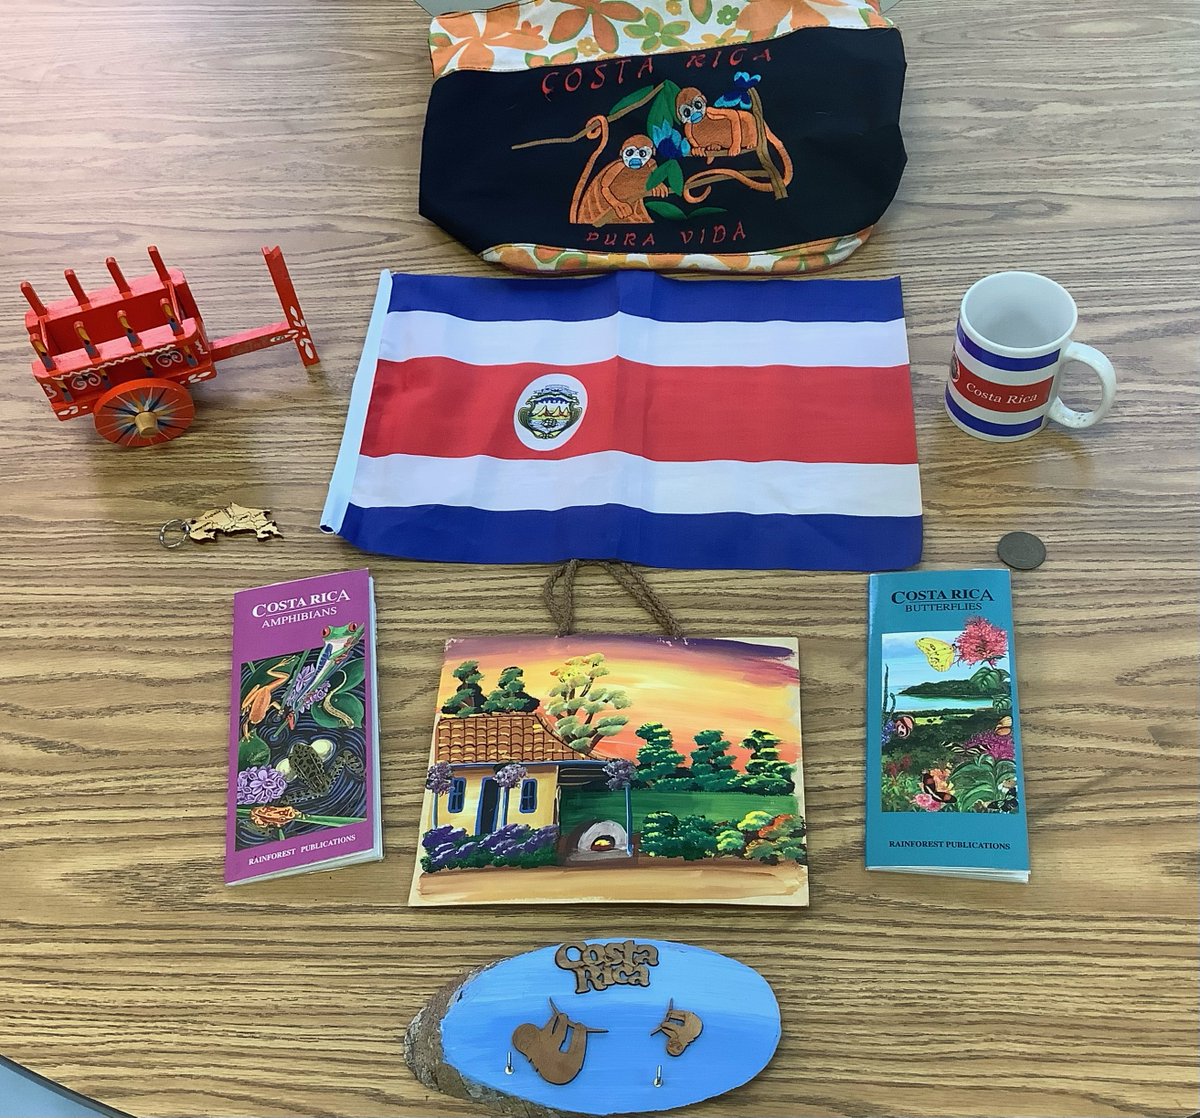 TY to Sra. Vargas for donating artifacts from her home country, Costa Rica, to our culture kit! Ss will be excited to learn more about Costa Rica through these items! Gracias a Sra. Vargas por donar artefactos de su país de origen, Costa Rica, a nuestro kit de cultura.